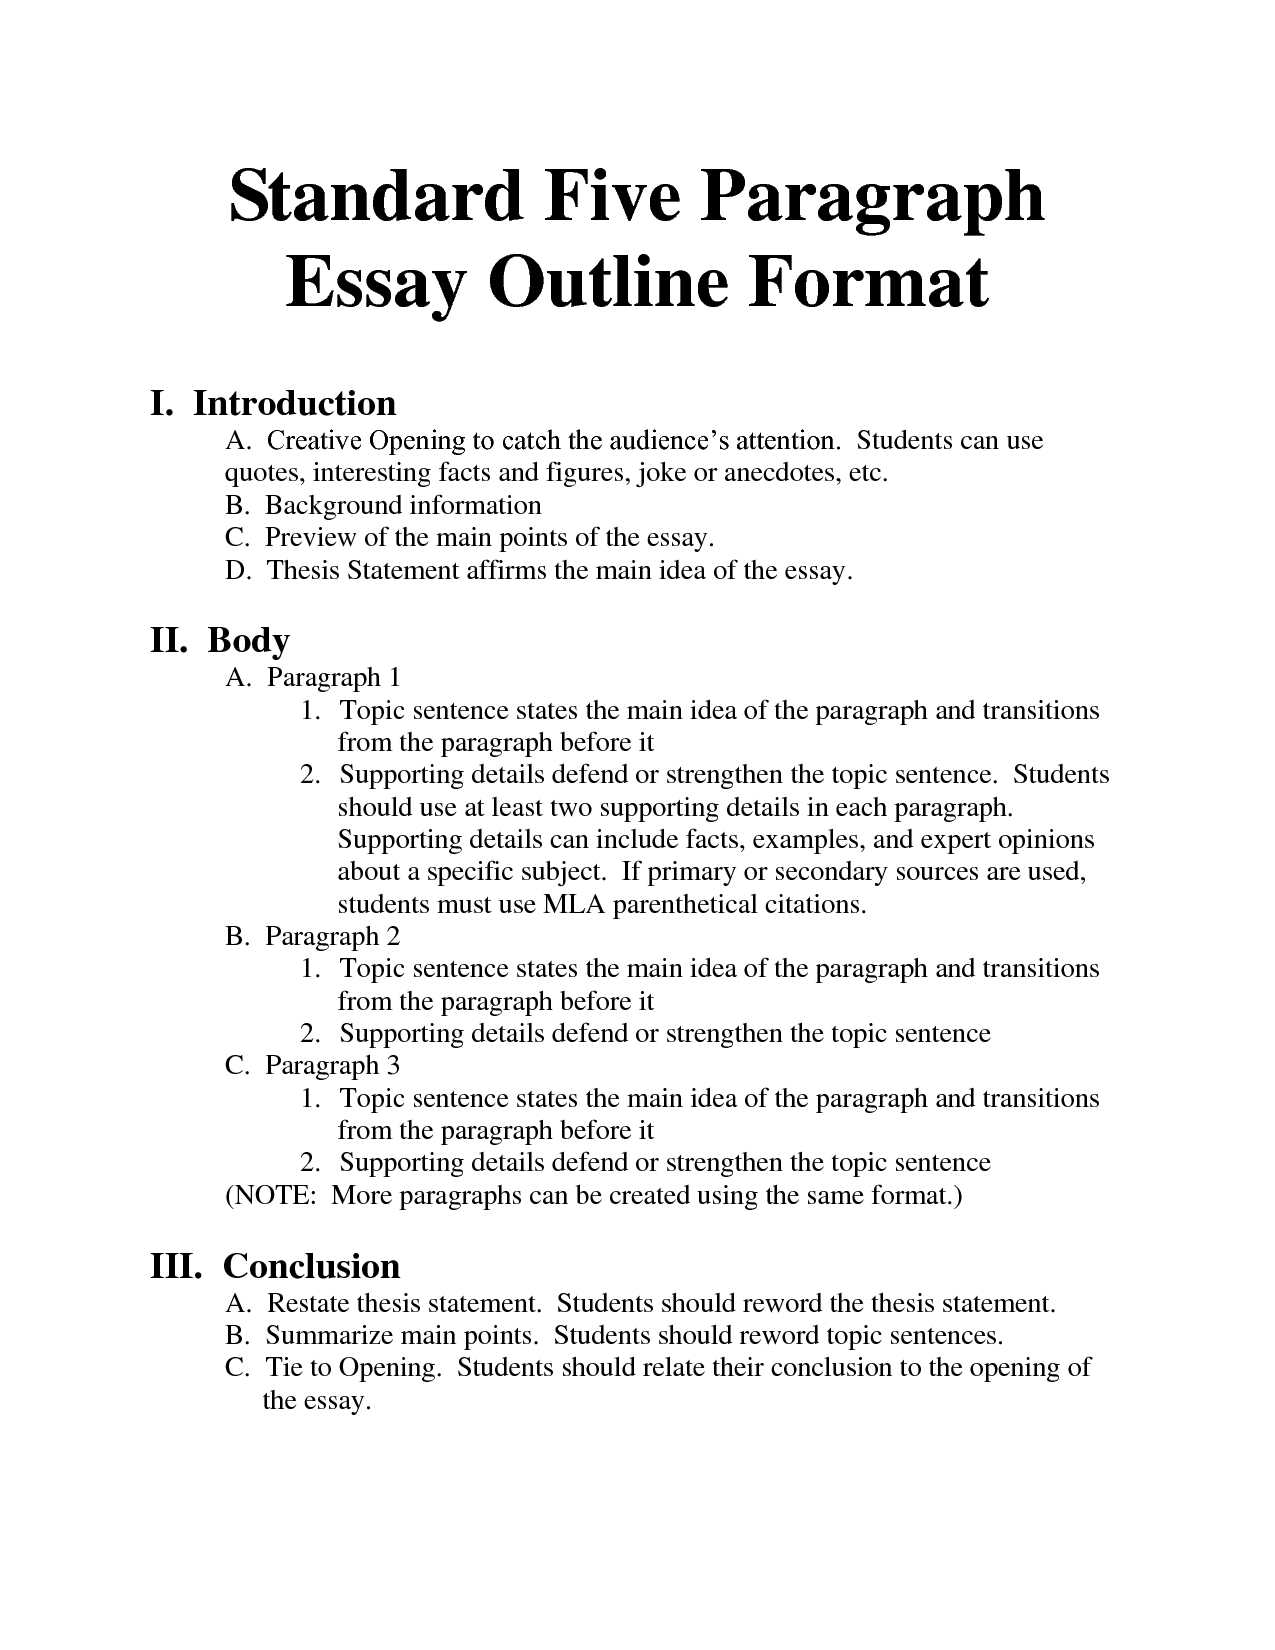 Poetic Devices Worksheet 5 together with 5 Year Plan Essay 17 Best Ideas About Good Essay How to Write Essay